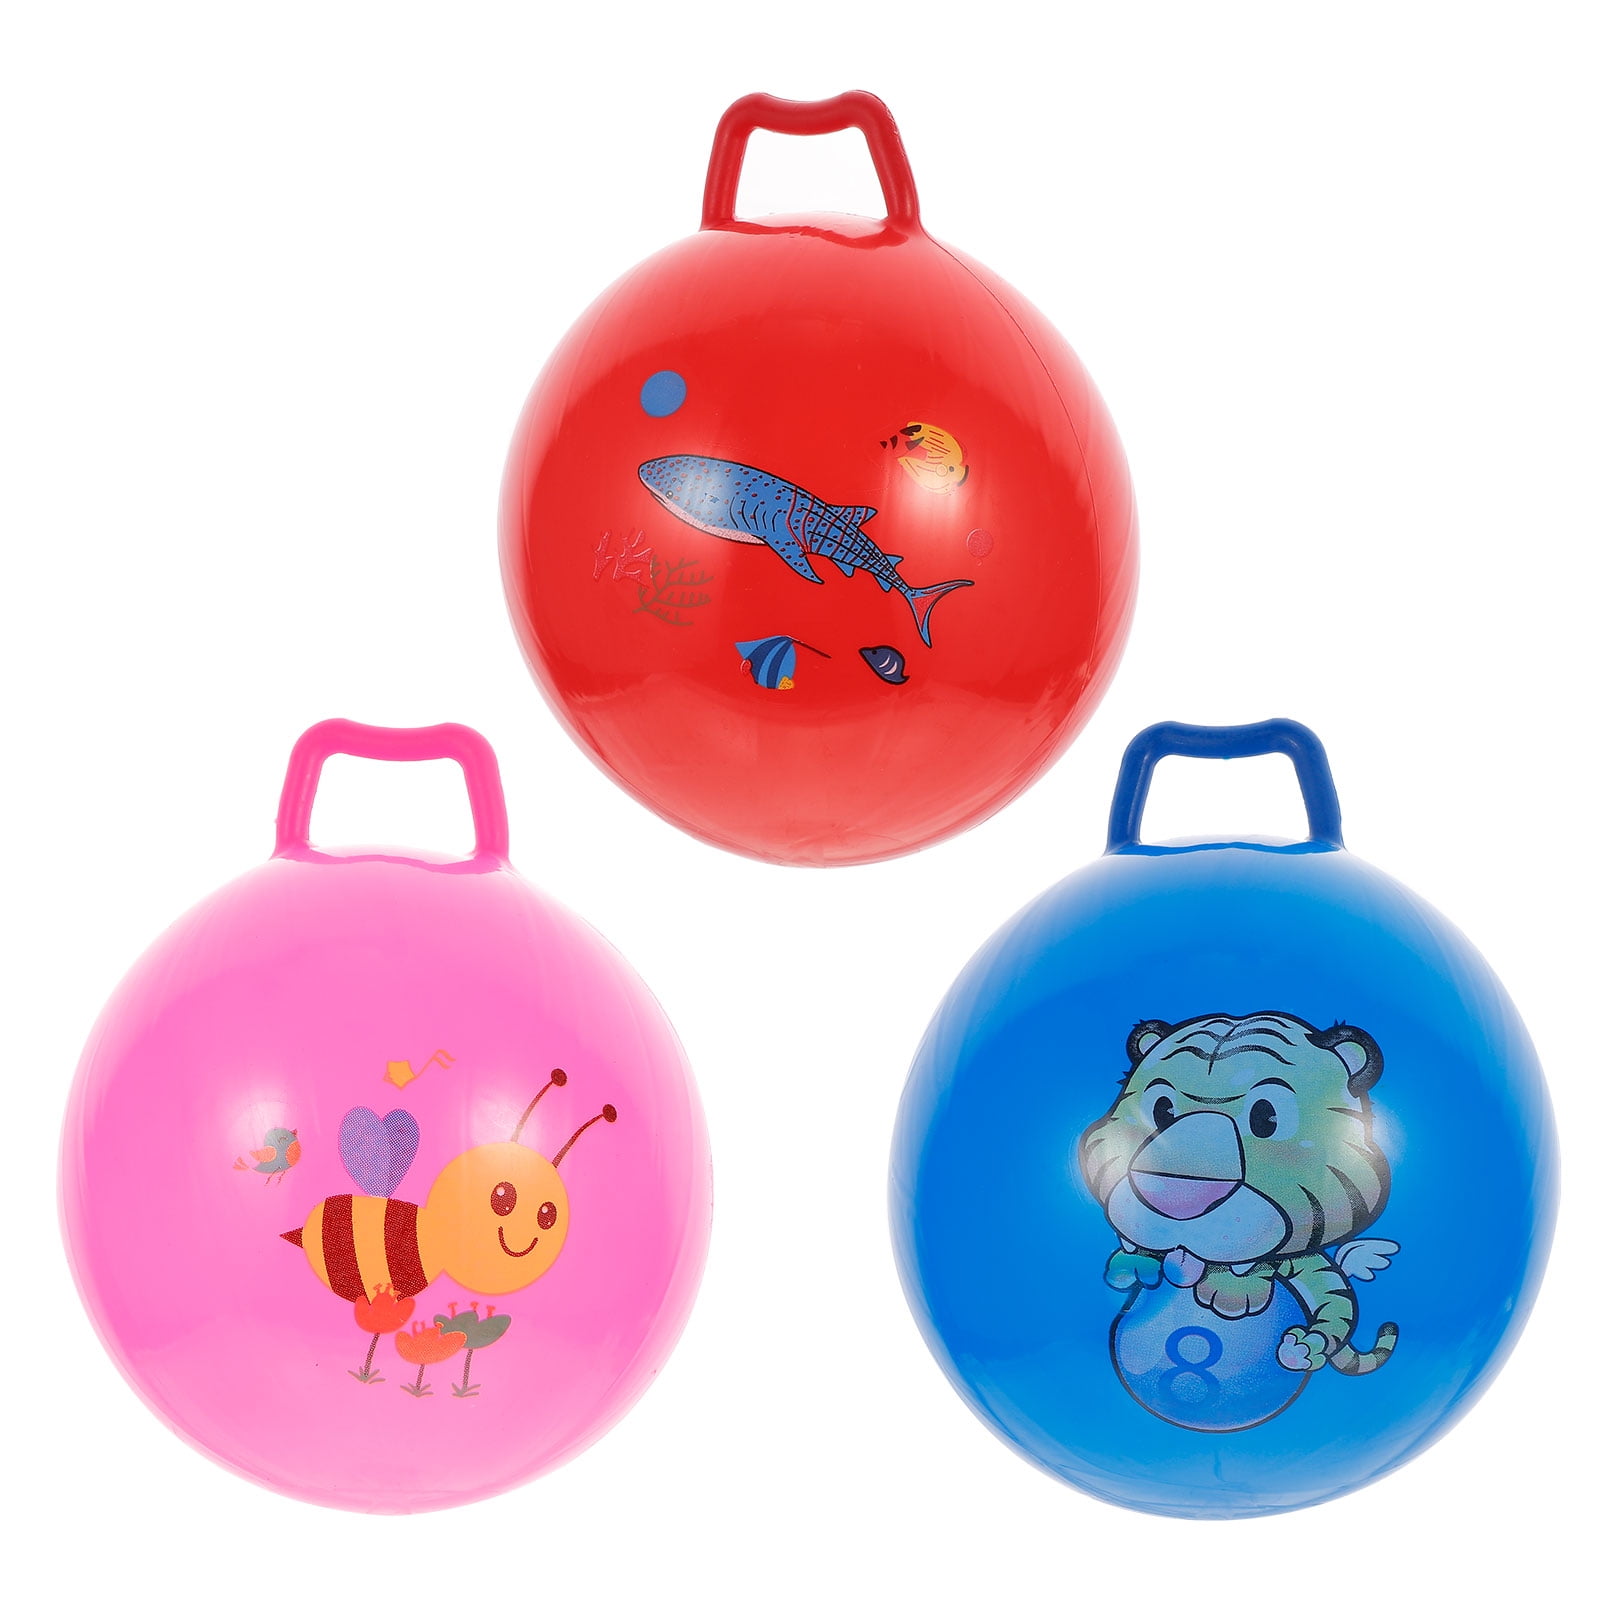 UNTERING Inflatable Jump Ball Hopper Bounce Outdoor Sports Toy Balls with Handle Kids Toy 